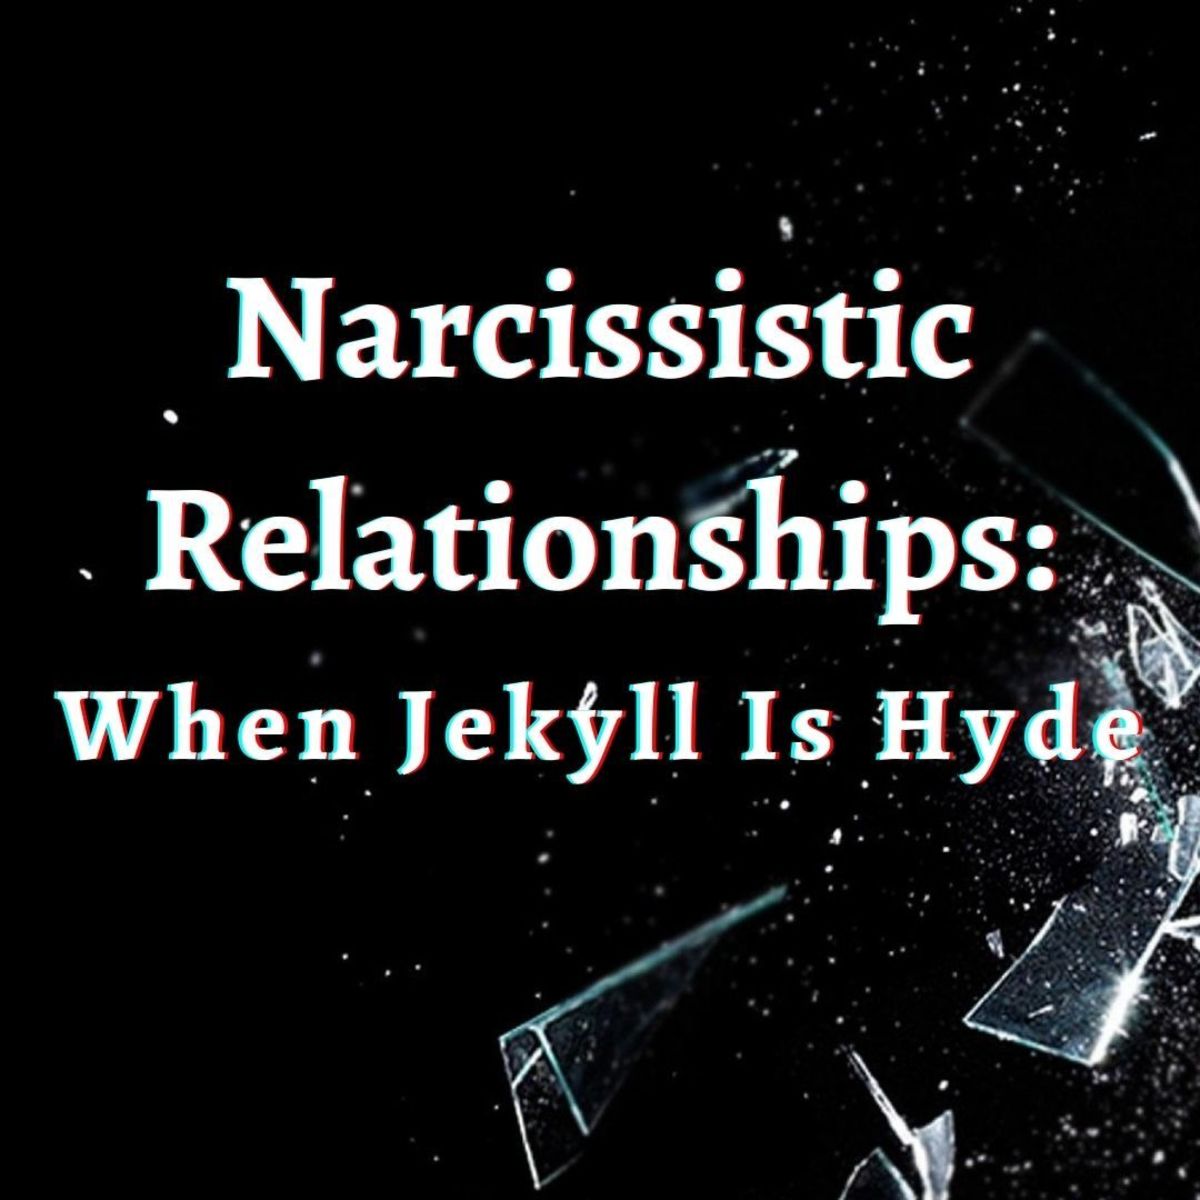 Part of narcissism is having moody and unpredictable behavior—much like Dr. Jekyll and Mr. Hyde.